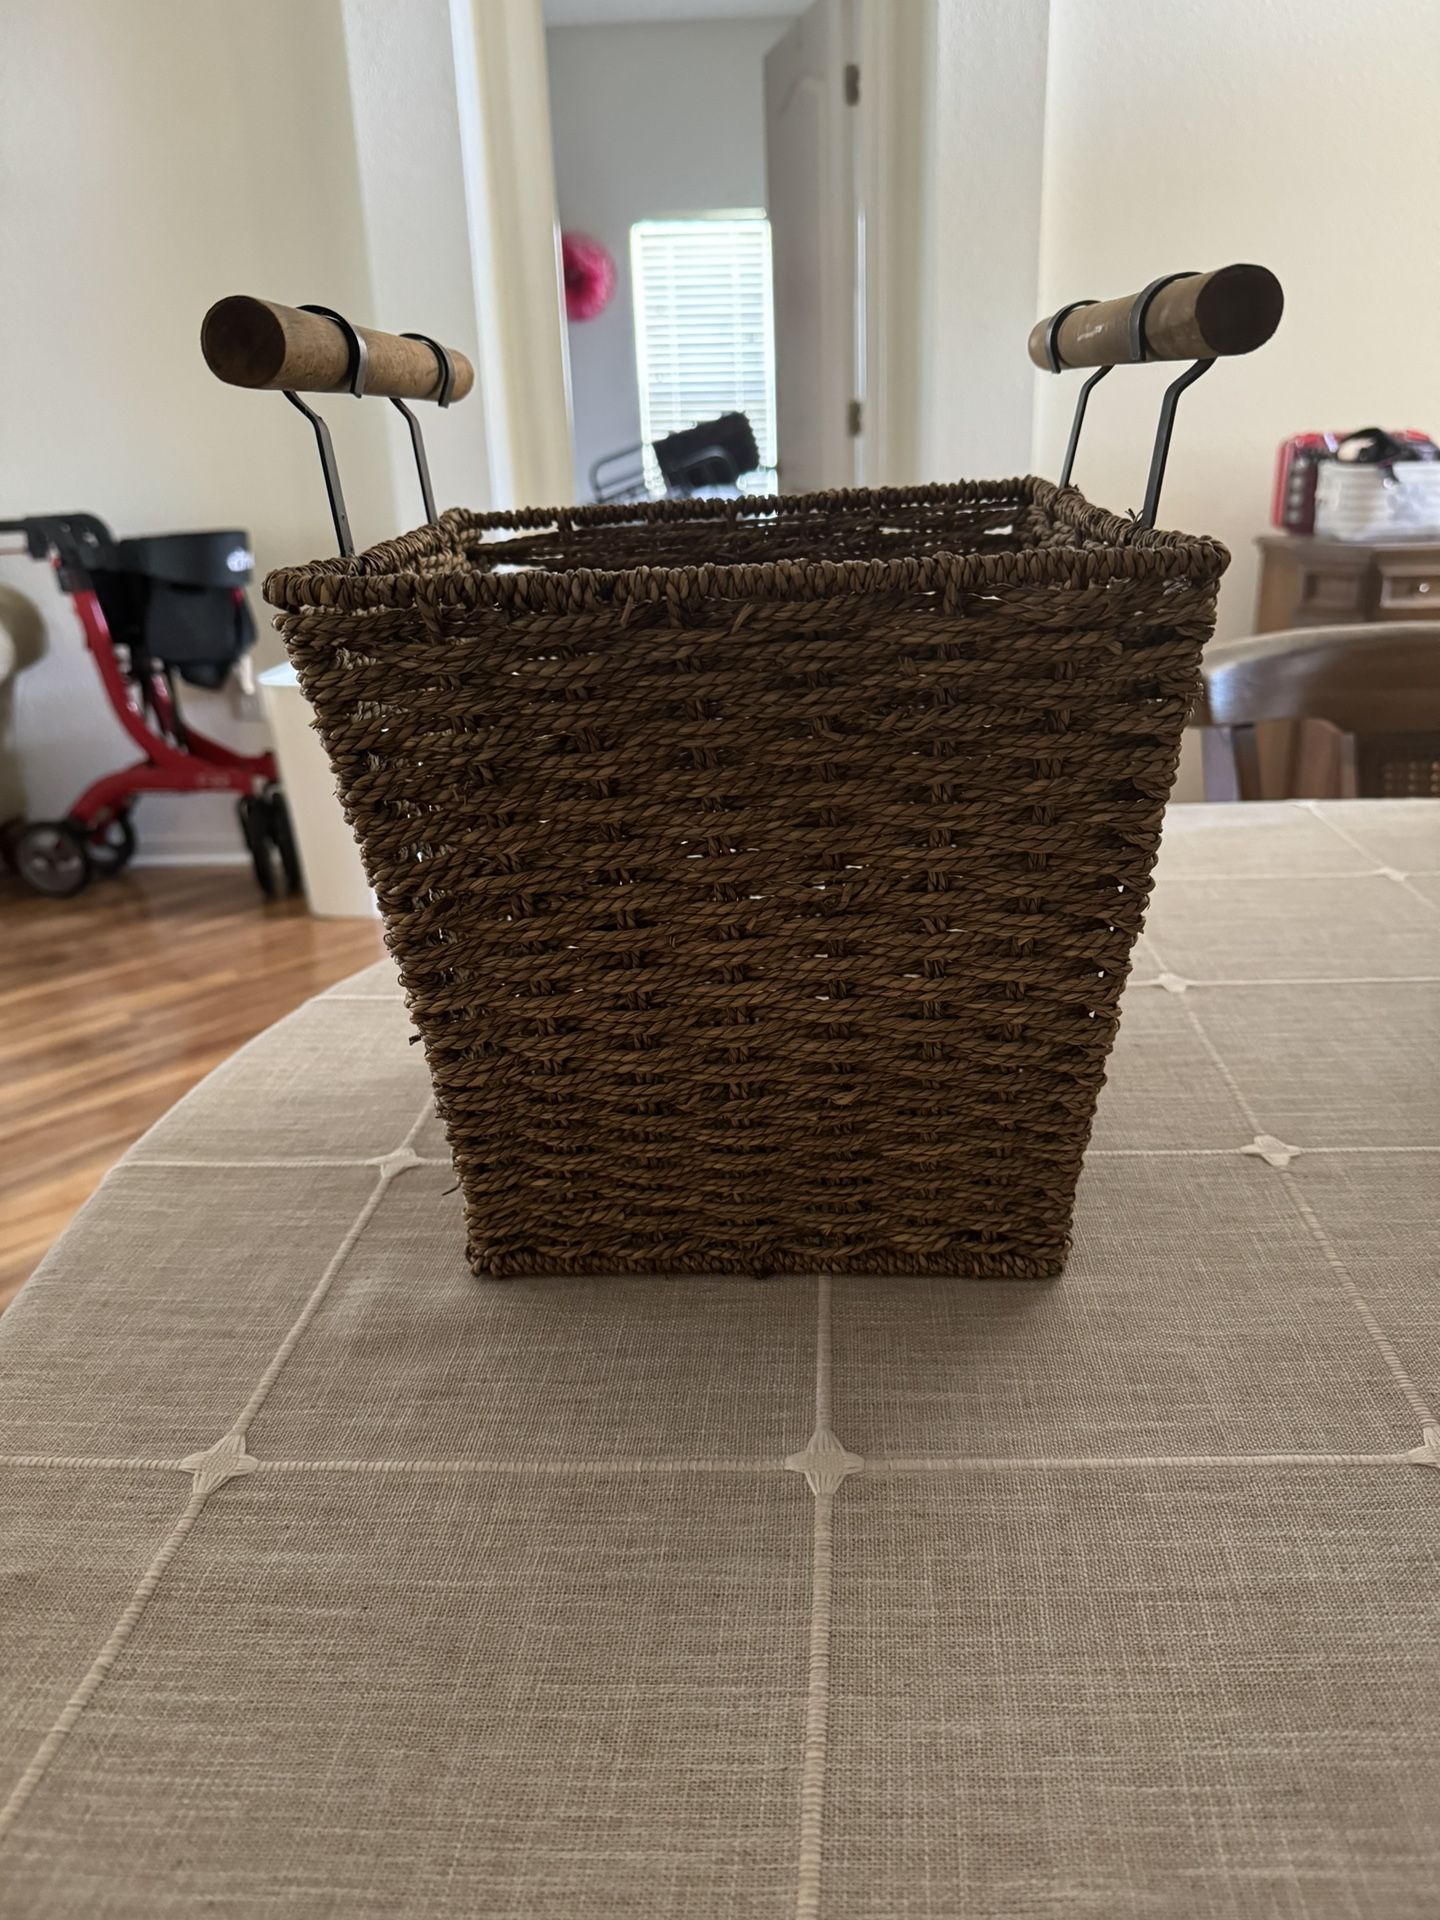 Woven Basket With Wooden Handles